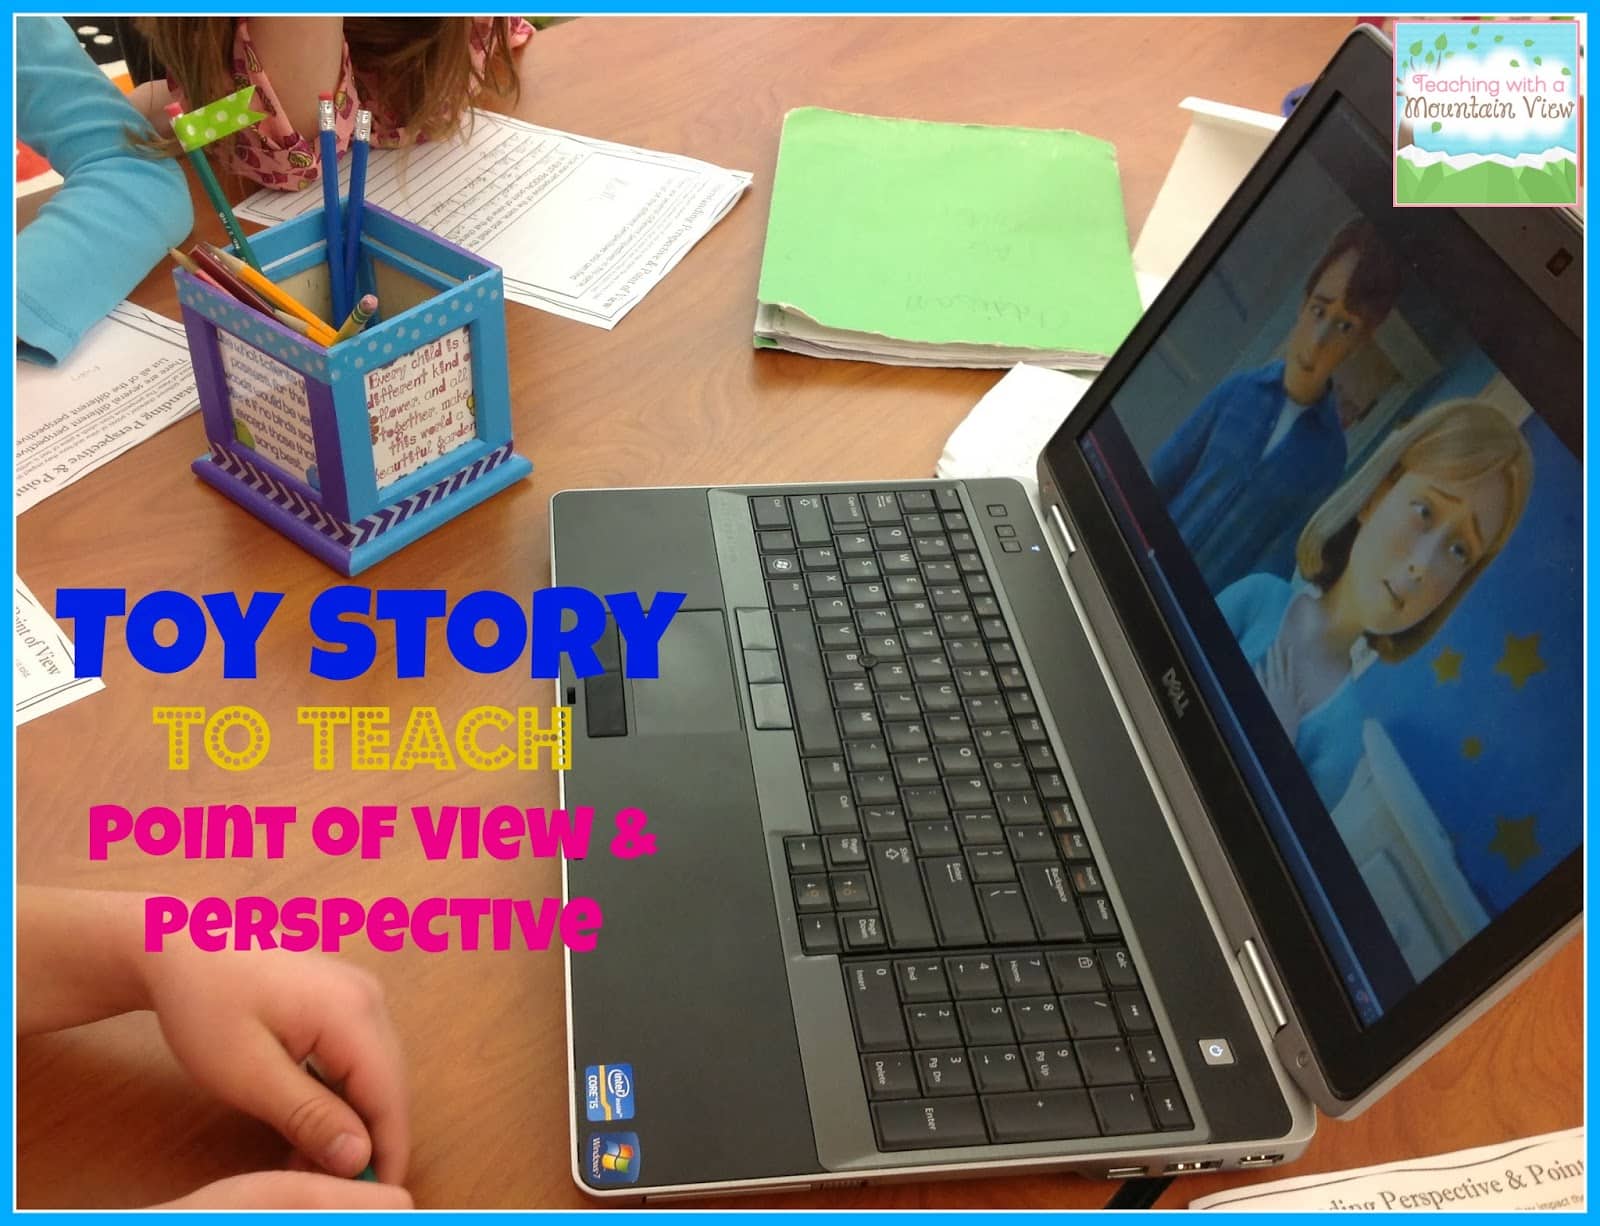 using video clips to teach point of view